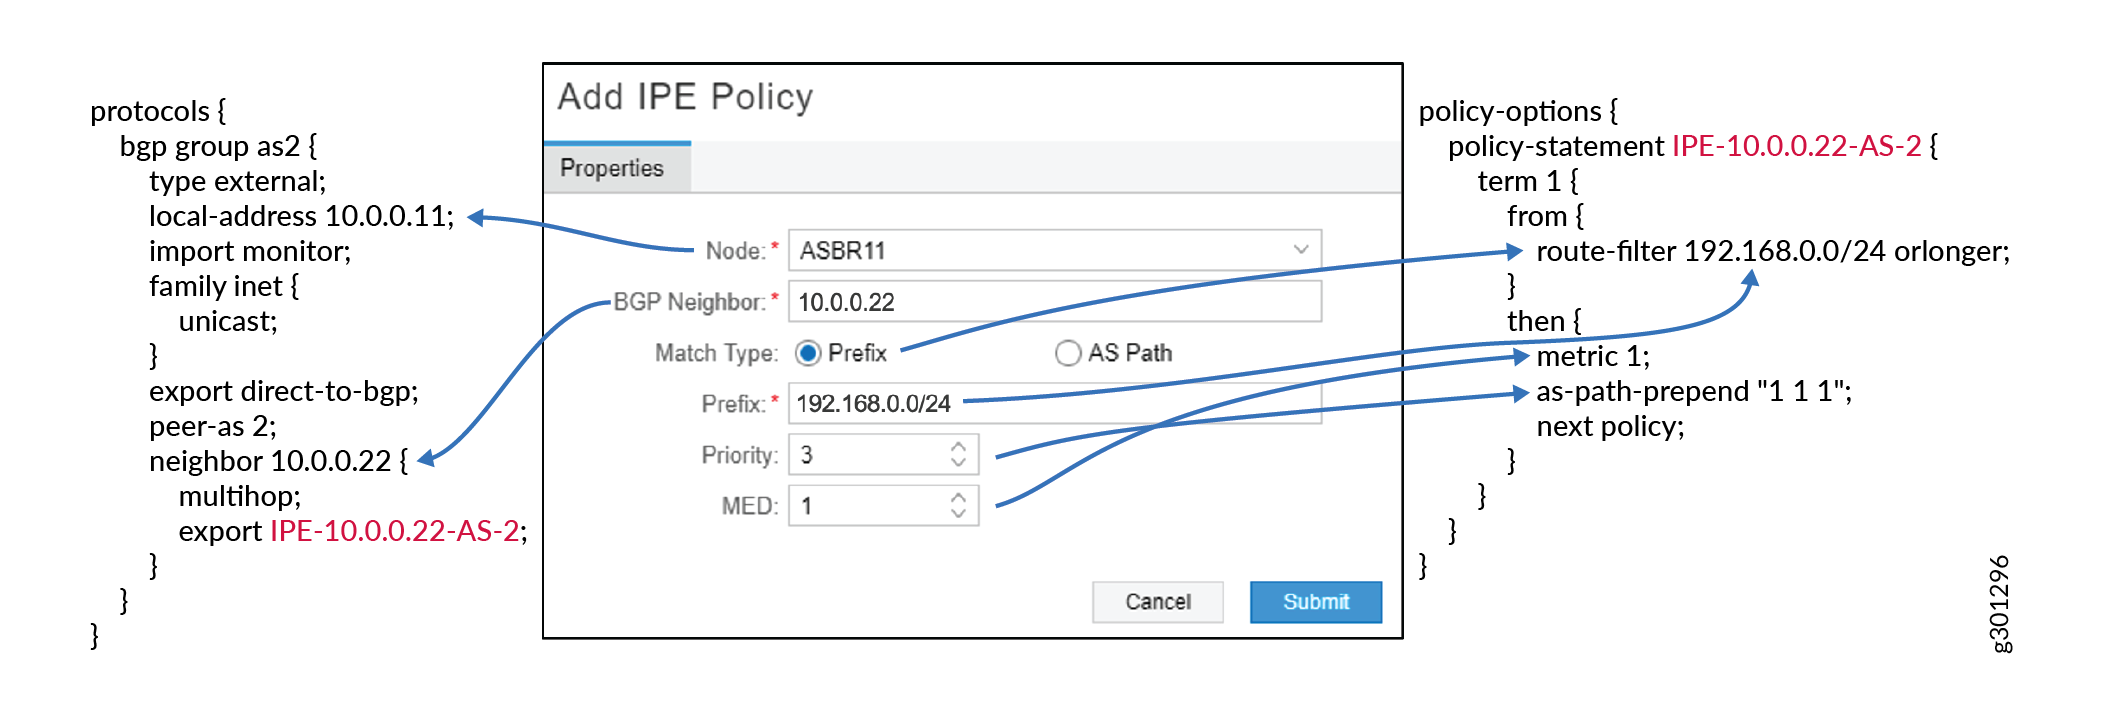 Mapping of the Add IPE Policy
Window to Junos OS Configuration